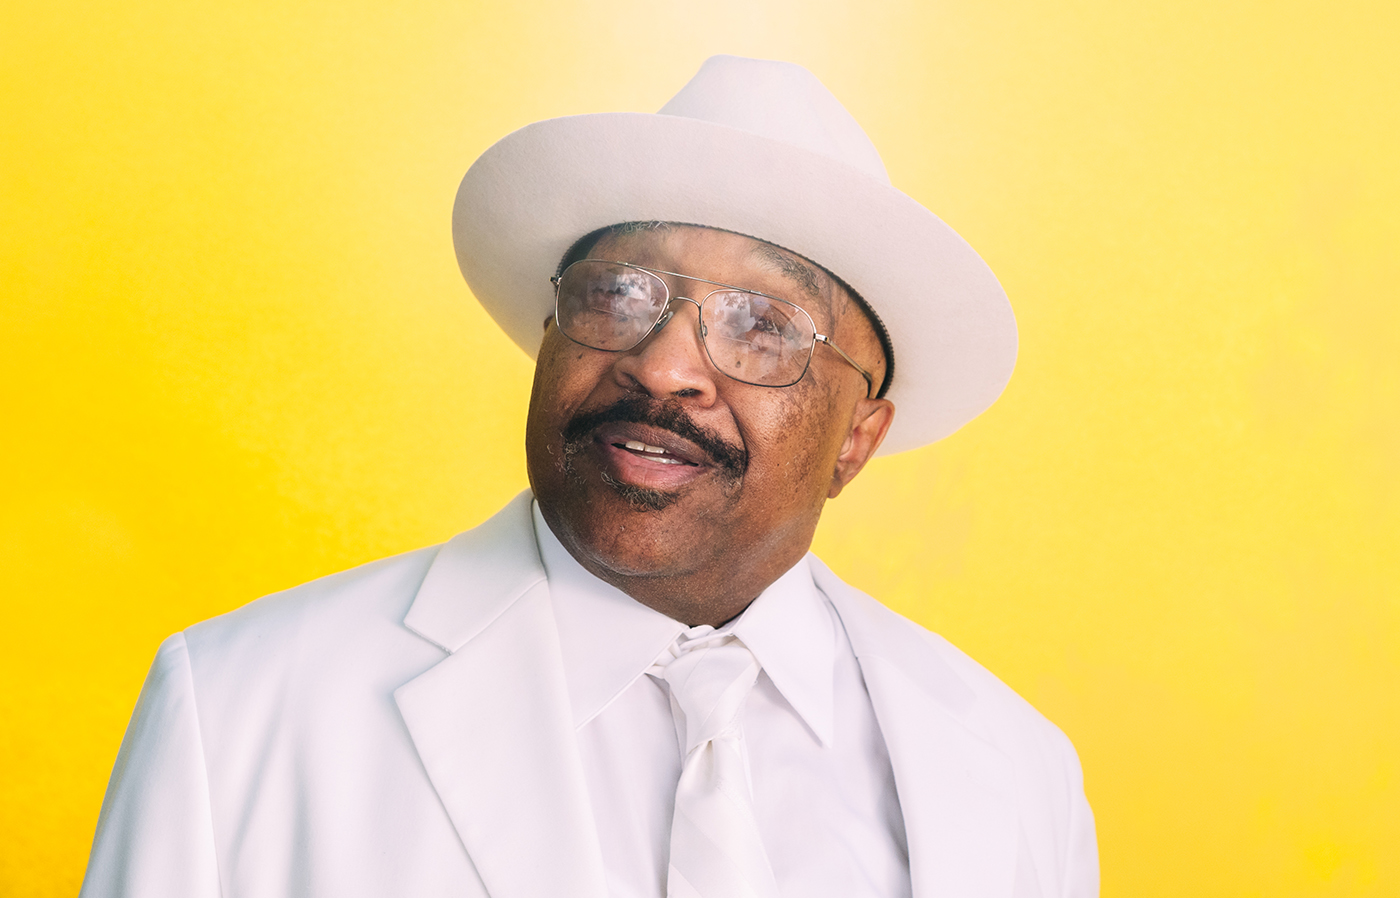 Listen: Swamp Dogg's Fireside Chat with Red Bull Radio, captured at LGW18